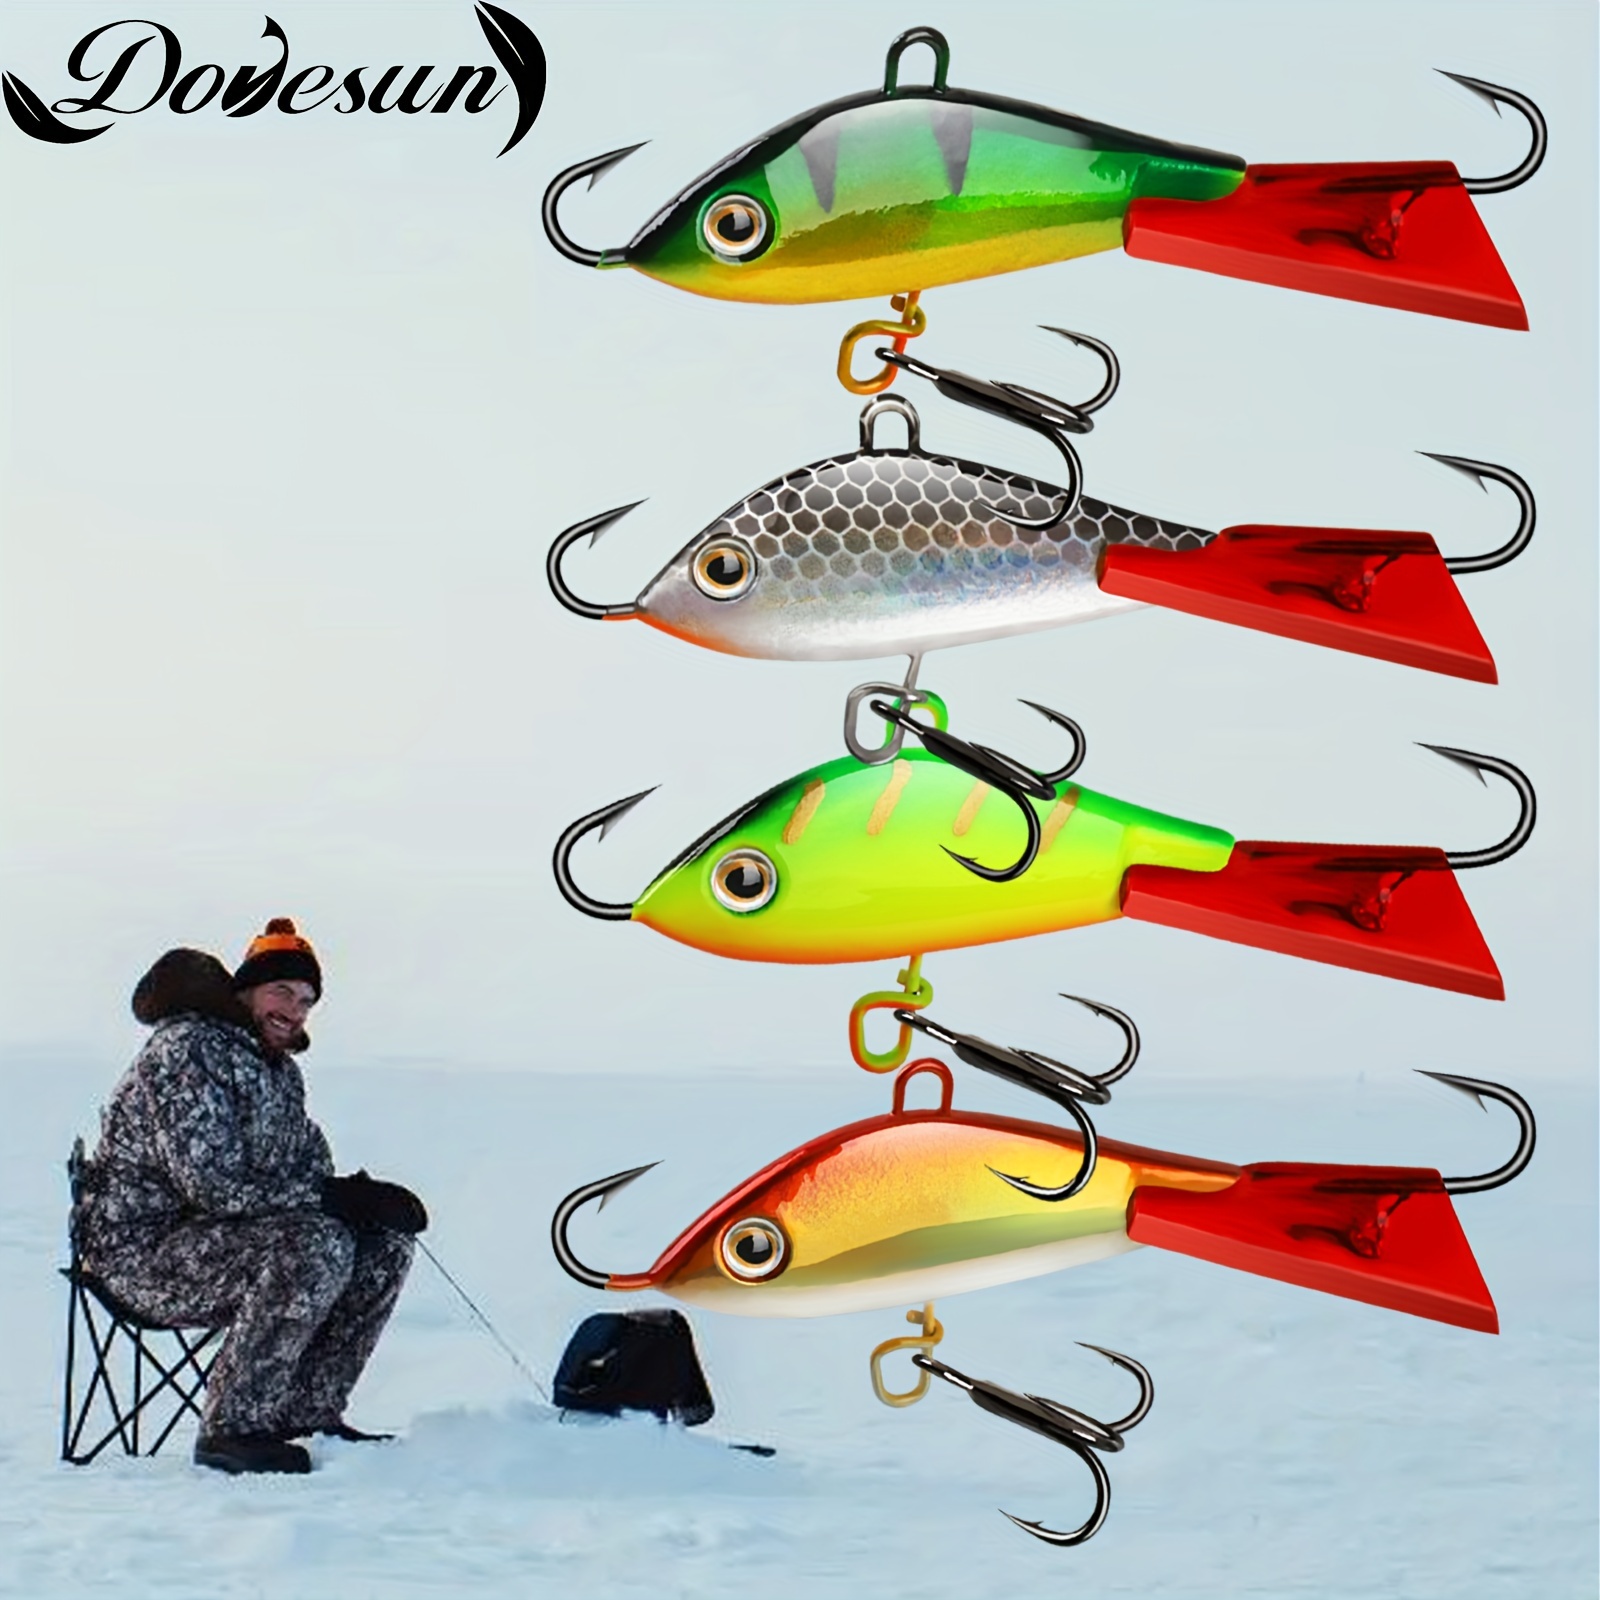 Snapper Rigs And Bait Winter Ice Fishing Jigs For Bass Perch Crappie  1.2g2.6g Artificial Fishing Bait Set Jig Head Hooks Fishing Tackle 230309  From Bai07, $15.91